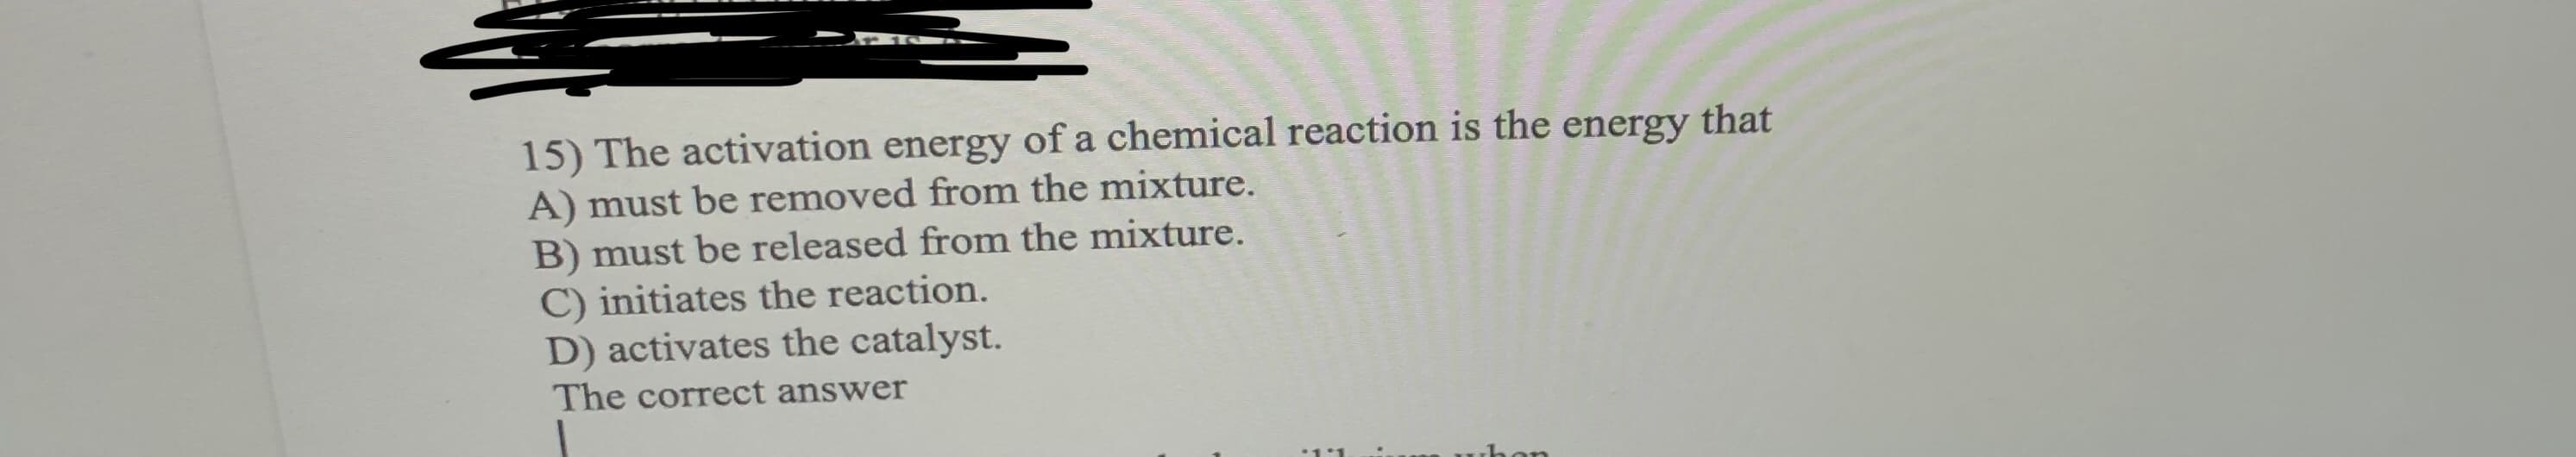 15) The activation energy of a chemical reaction is the energy
A) must be removed from the mixture.
that
B) must be released from the mixture.
initiates the reaction.
D) activates the catalyst.
